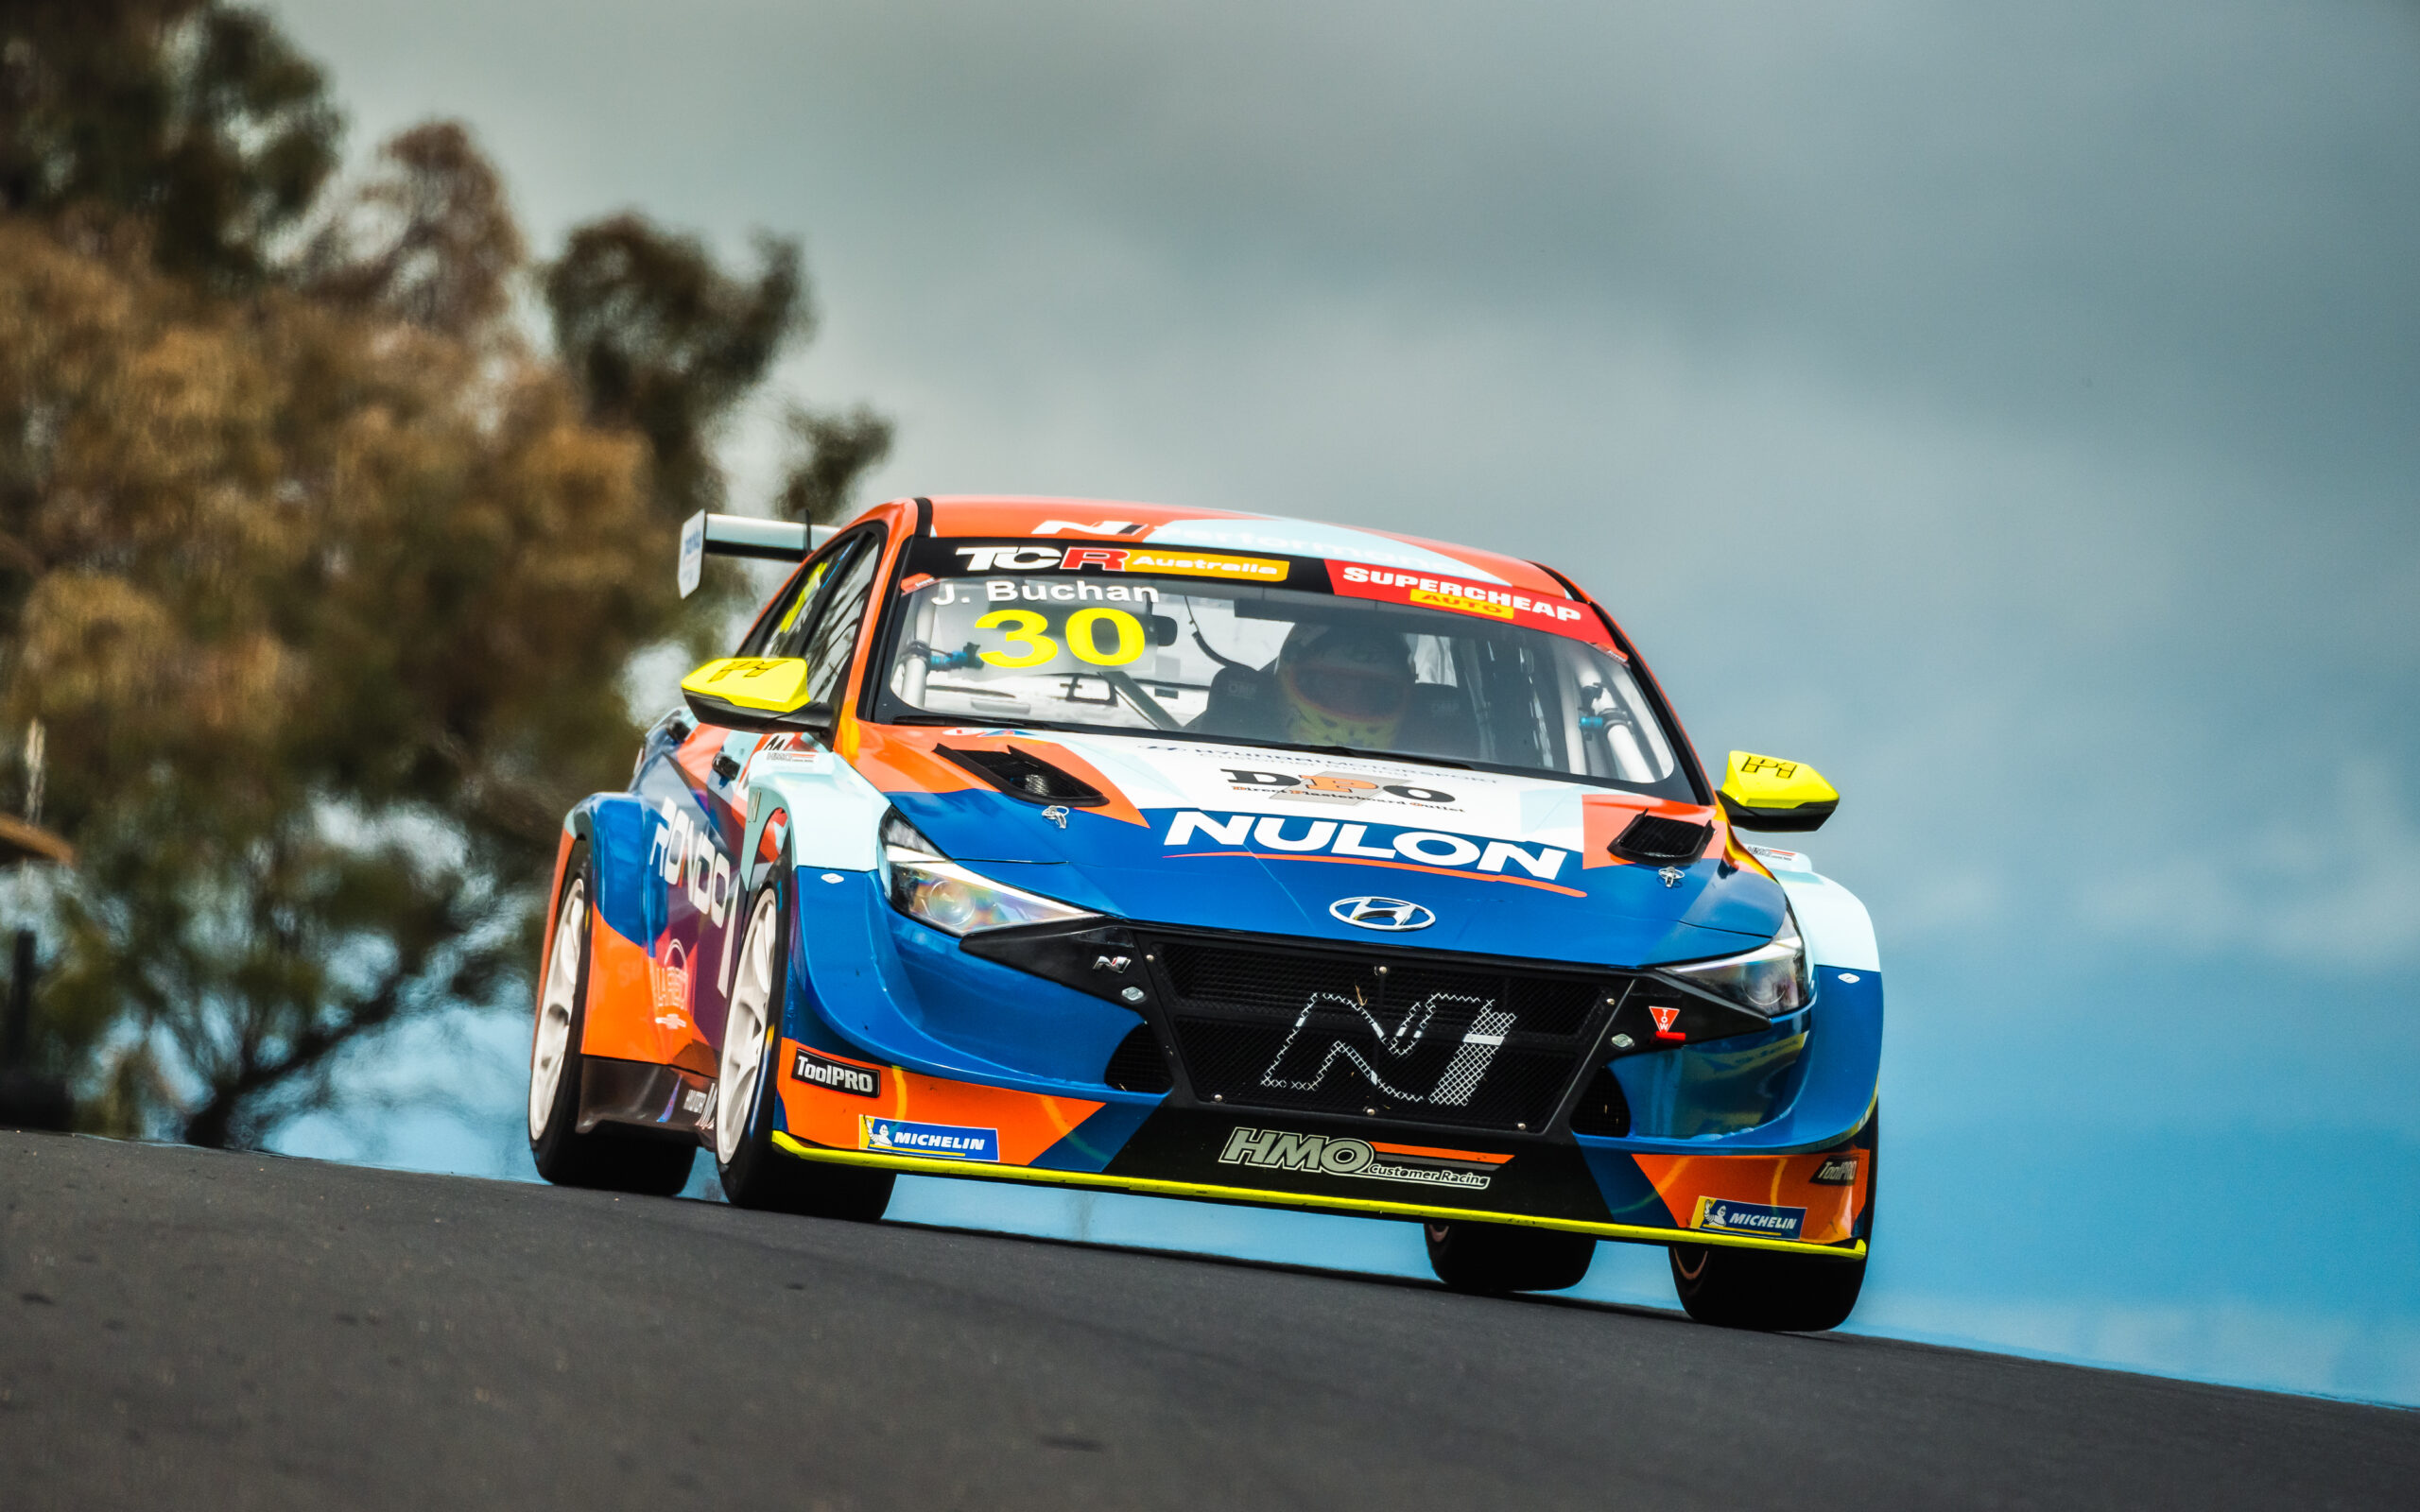 Difficult early development leads to strong results for Josh Buchan in new Hyundai